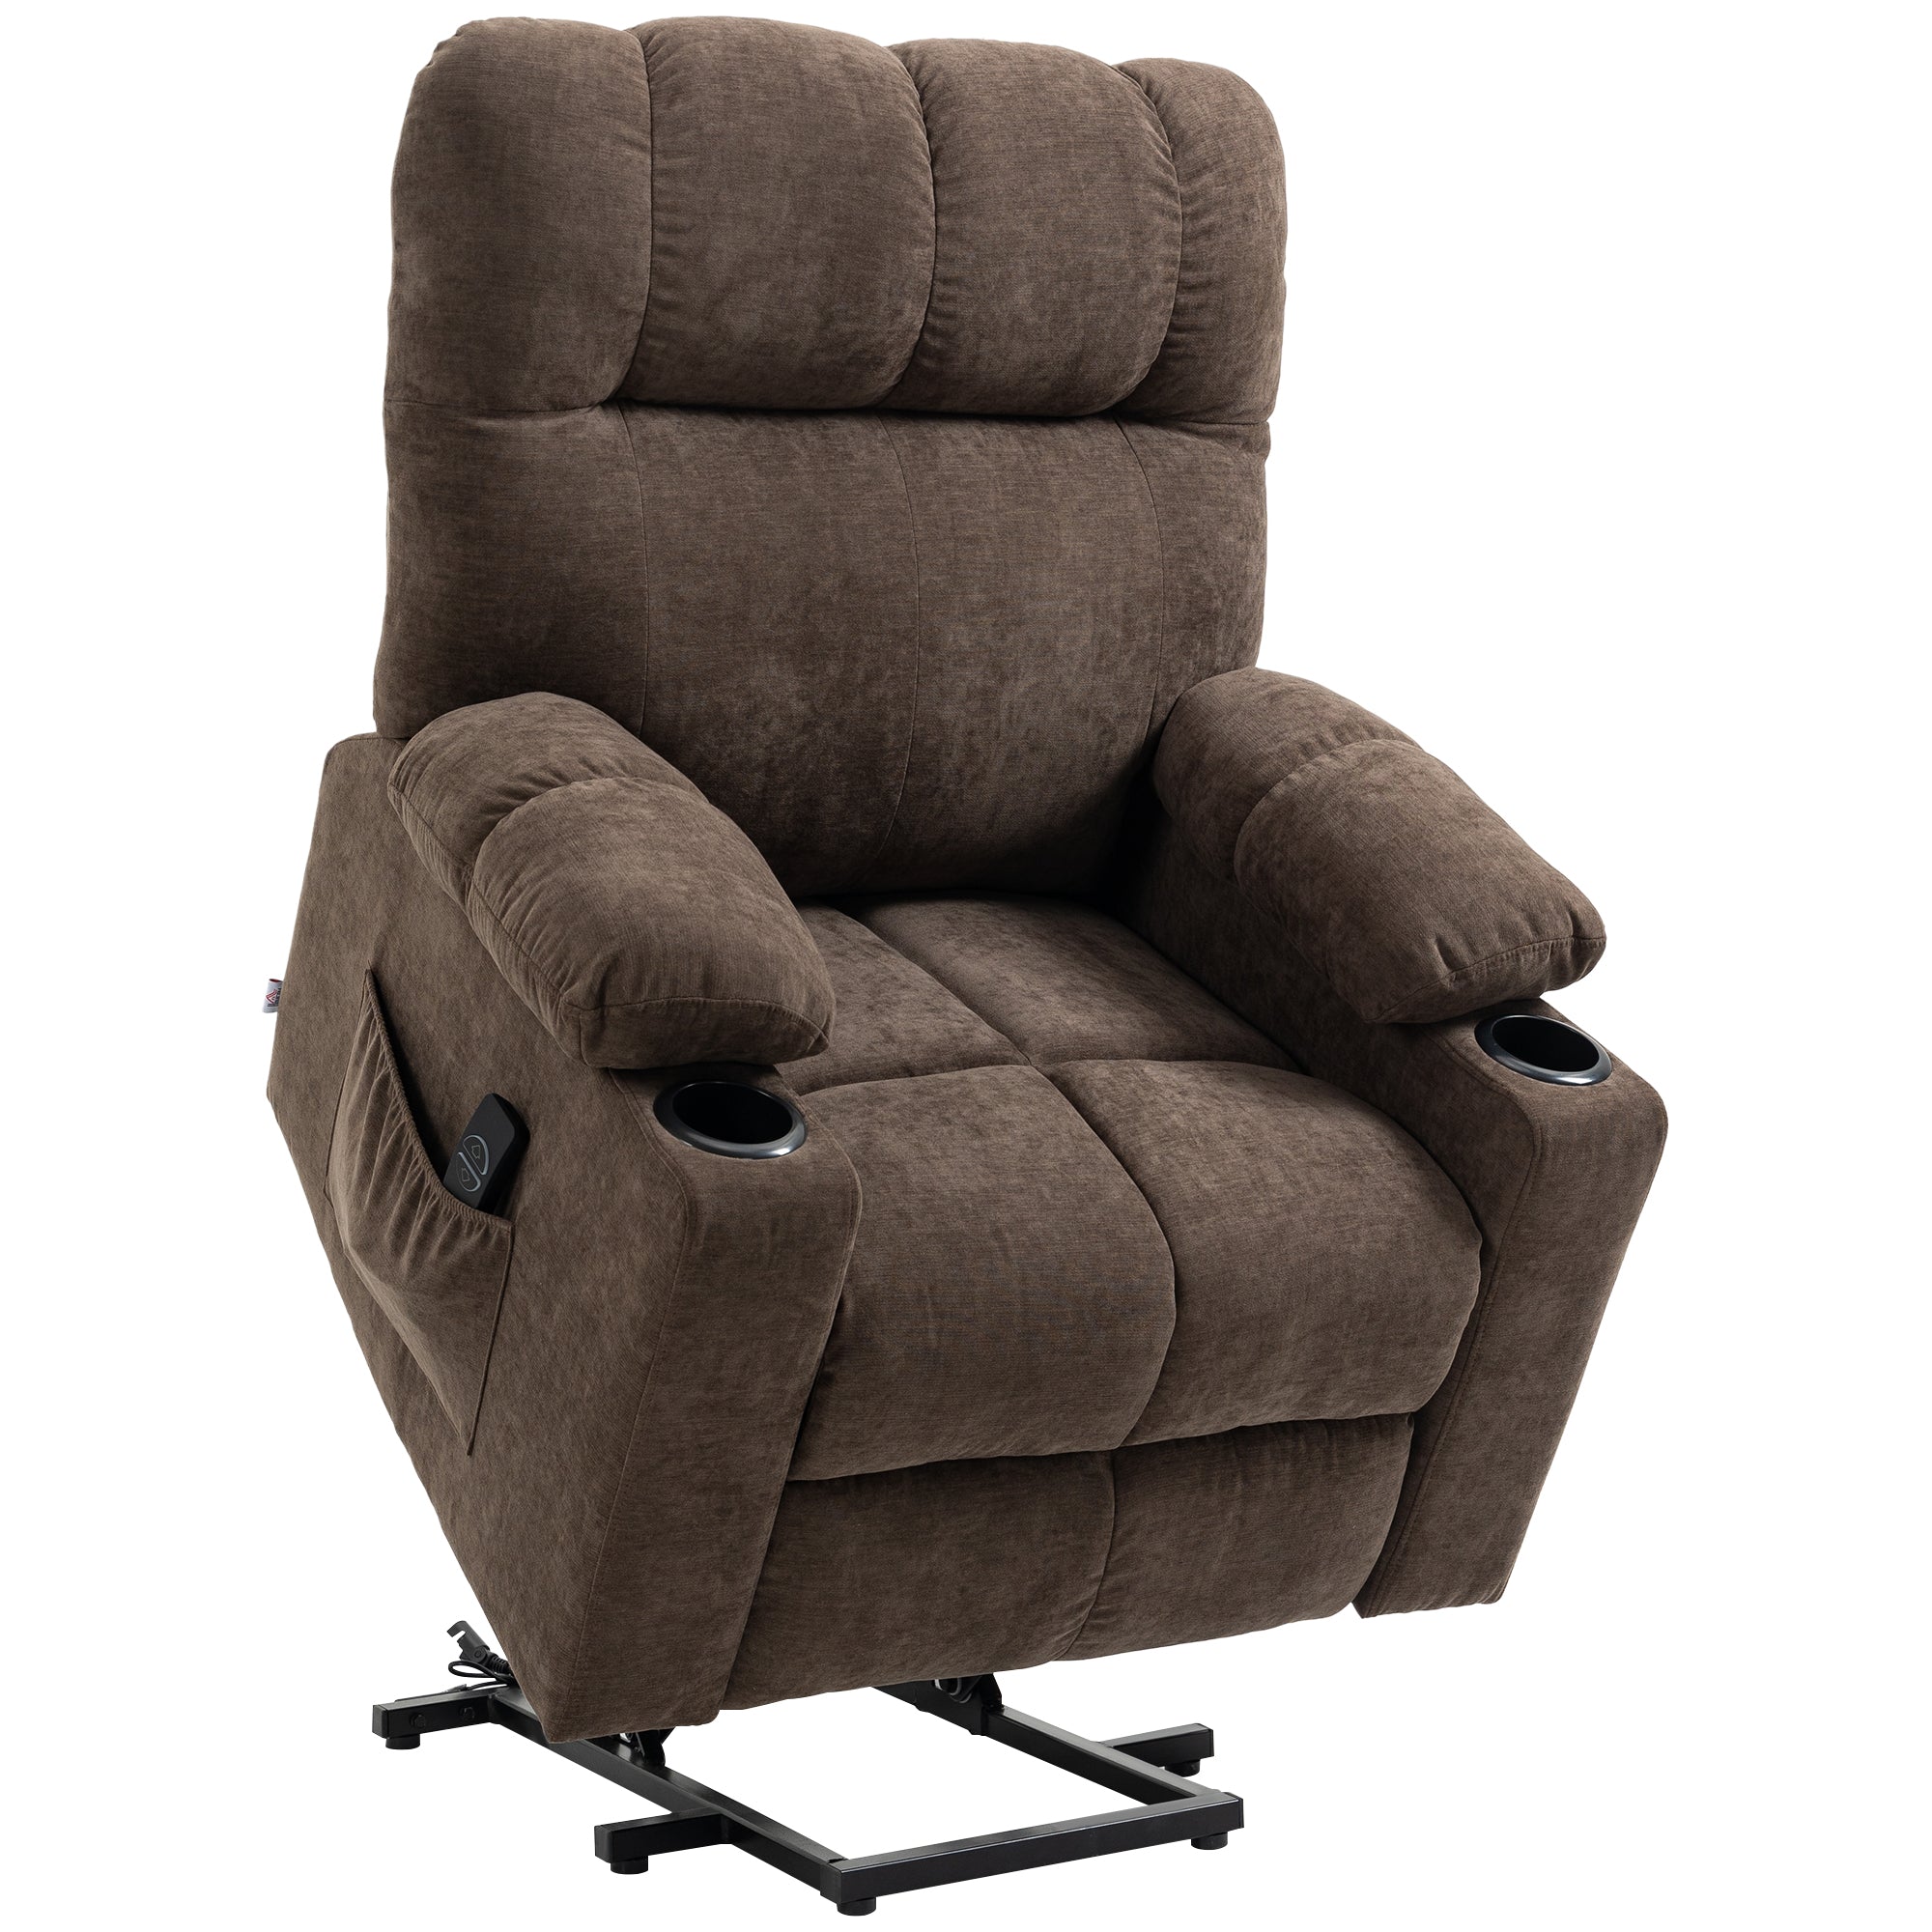 HOMCOM Electric Riser and Recliner Chair for Elderly - Velvet-touch Fabric Power Lift Recliner Chair for Living Room with Remote Control - Side Pocket